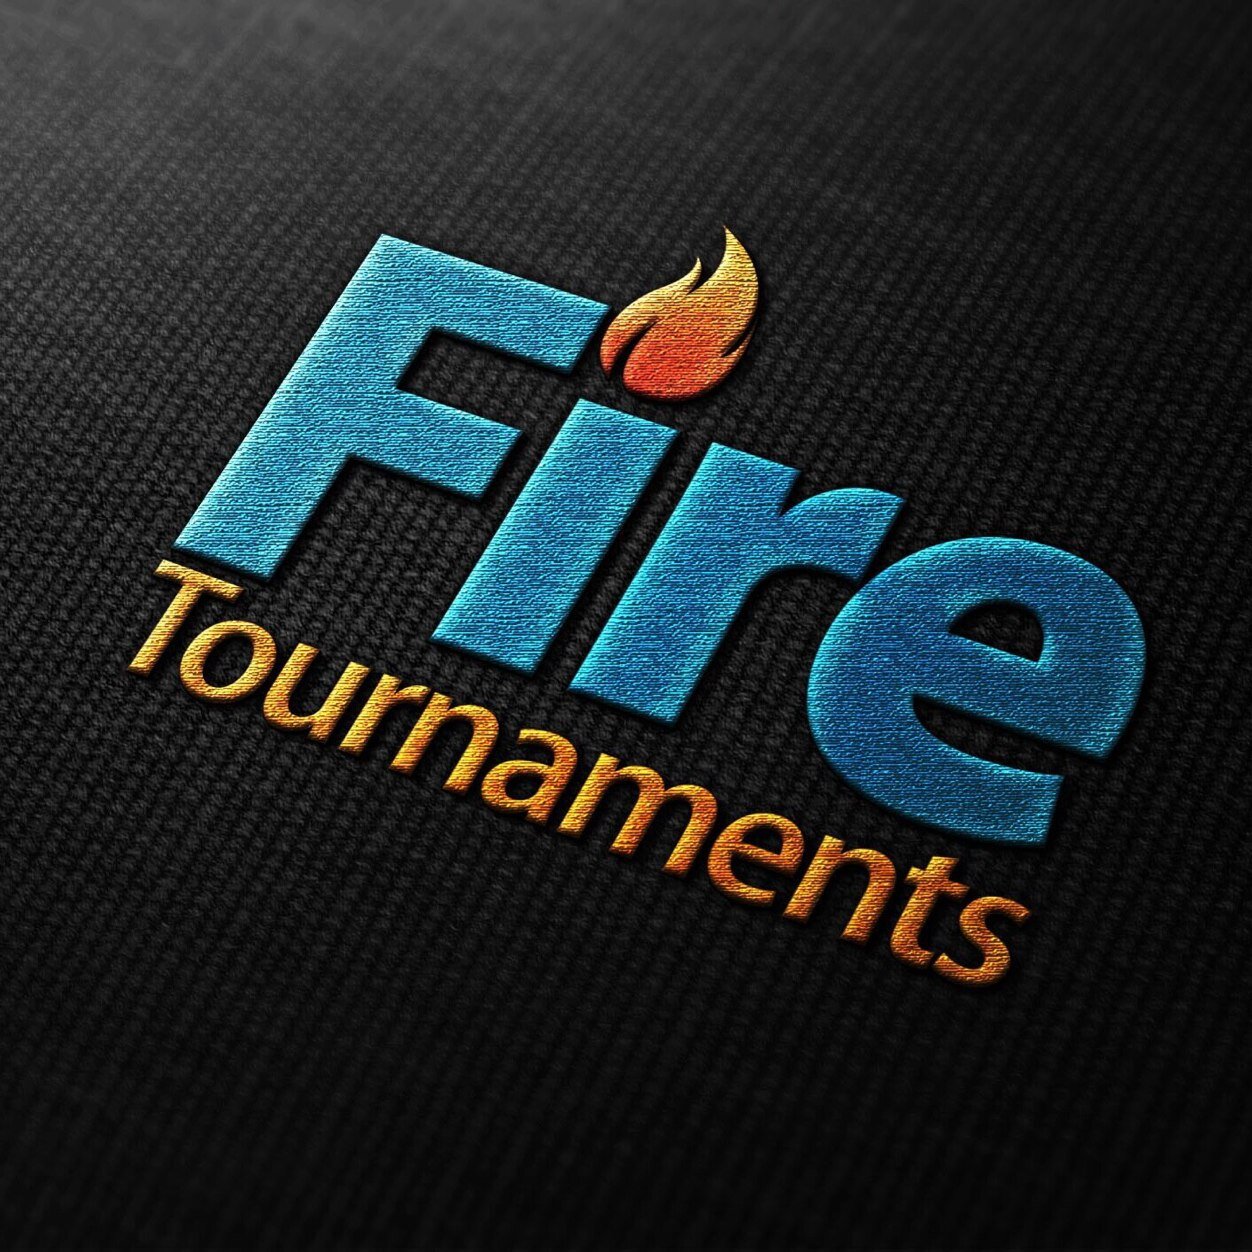 I am the Partner of @FireTournament . You can send me GTS to all of his tournaments also!